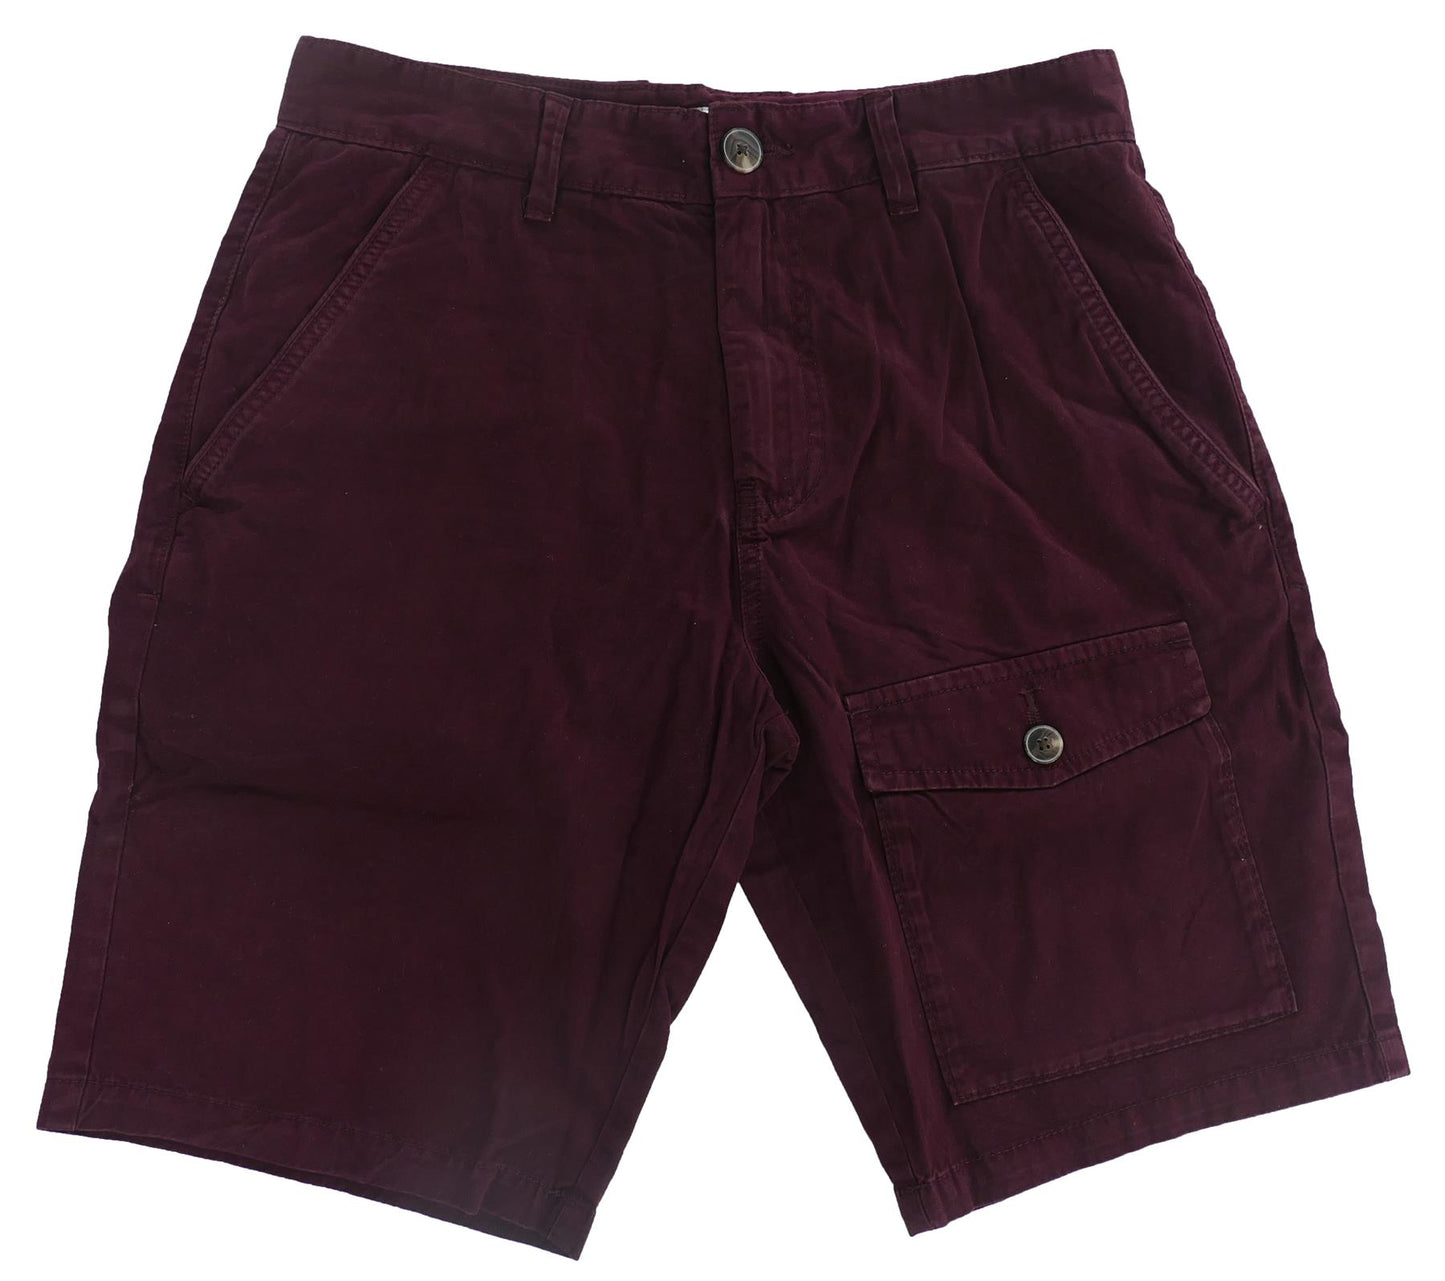 Ex Store Chinos & Cargo Shorts for Men 100% Cotton